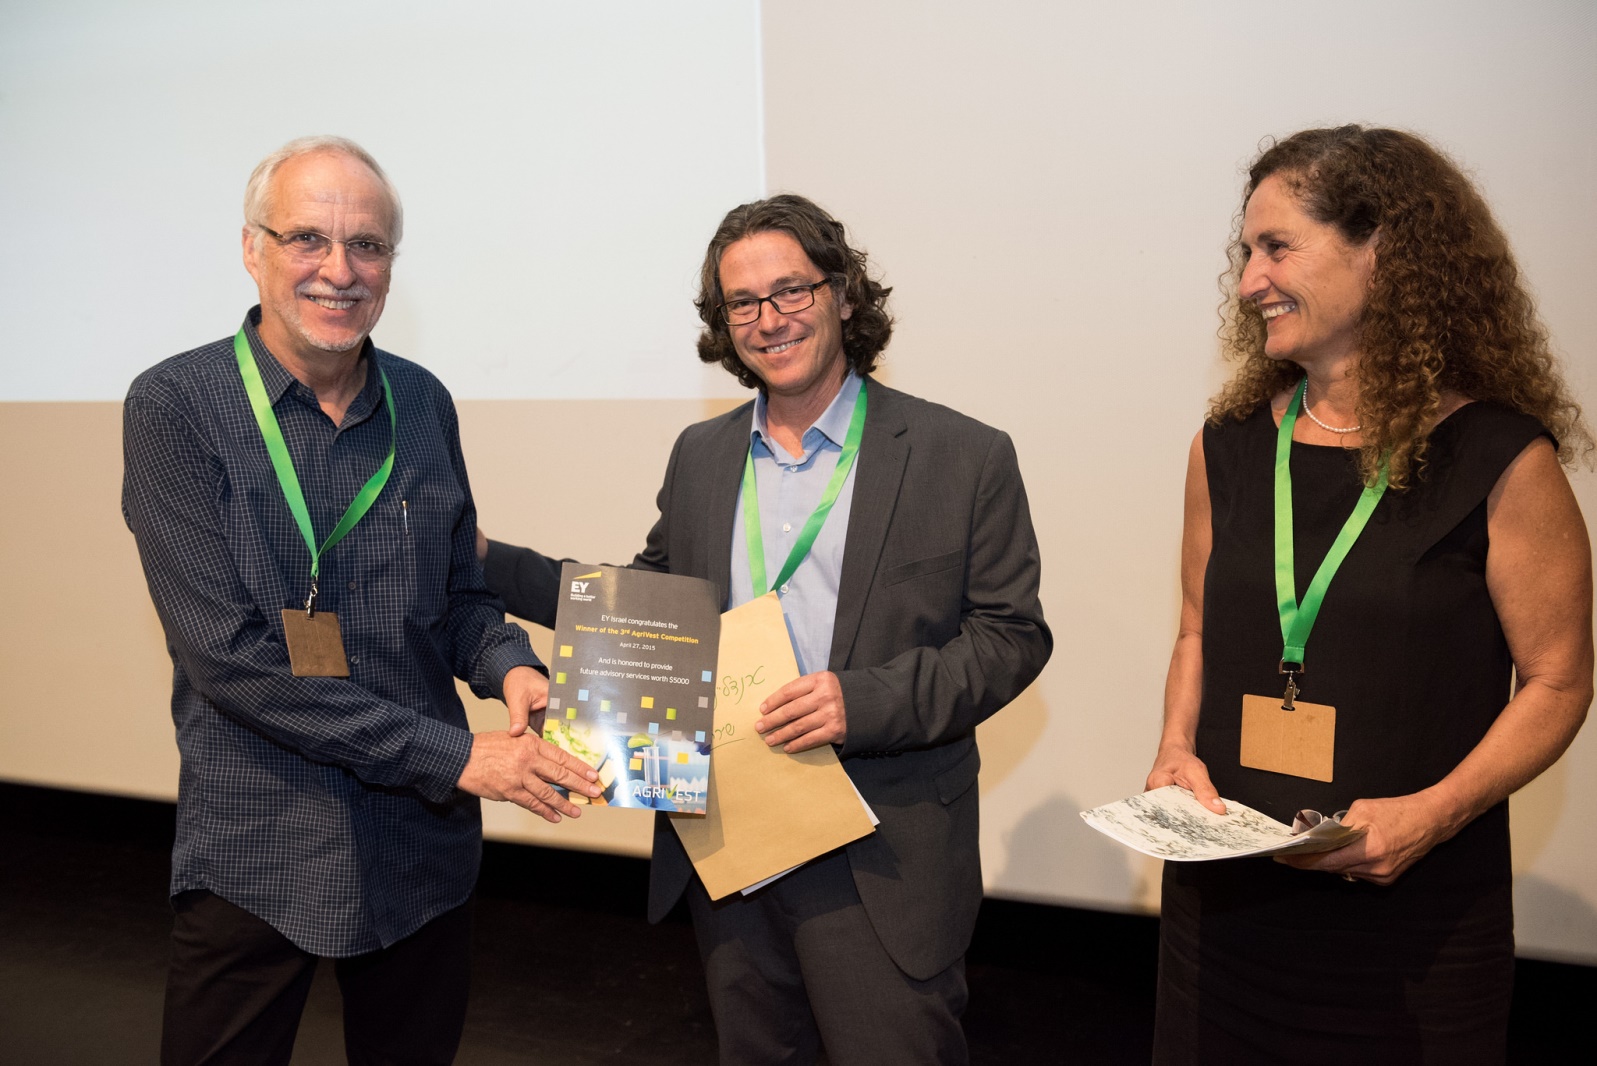 DouxMatok’s Eran Baniel, left, receiving the AgriVest 2015 Best Company award from Director of the Investment Promotion Center of the Israeli Ministry of Industry, Trade and Labor Oded Distel and Nitza Kardish, CEO of Trendlines Agtech. Photo by Nitzan ZoharTrendlines Group